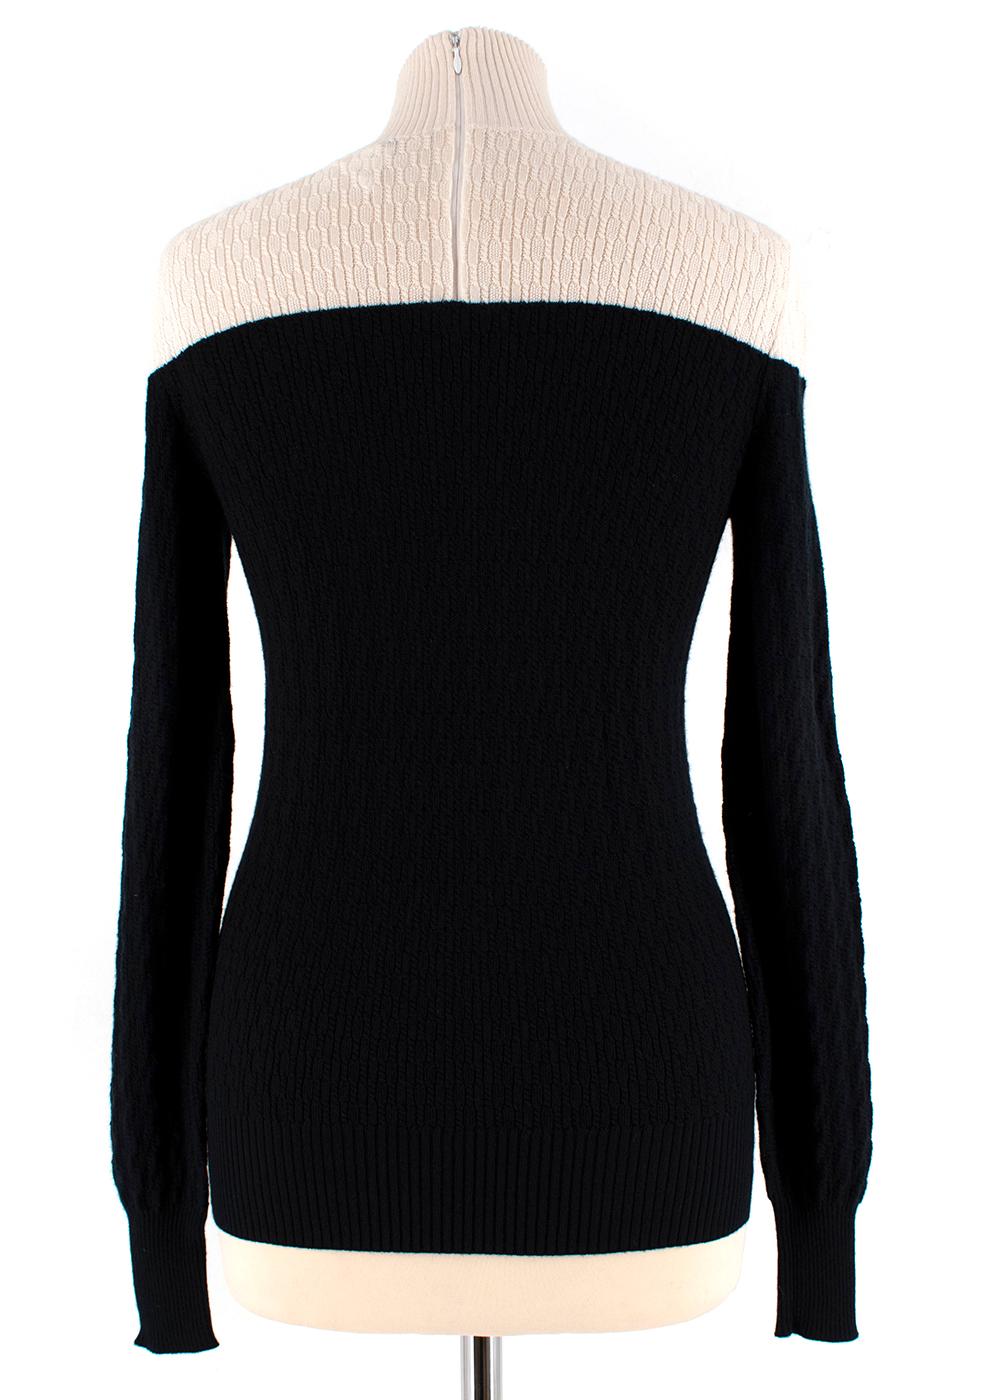 Chanel Two-Tone Knit Cashmere Blend Roll Neck Jumper

- Light weight material
- Chunky knit with contrast colours cream and black 
- Ribbed neckline
- Long sleeves
- Warm blend of cashmere
- White zip at the back of neck
- Gunmetal CC on the bottom